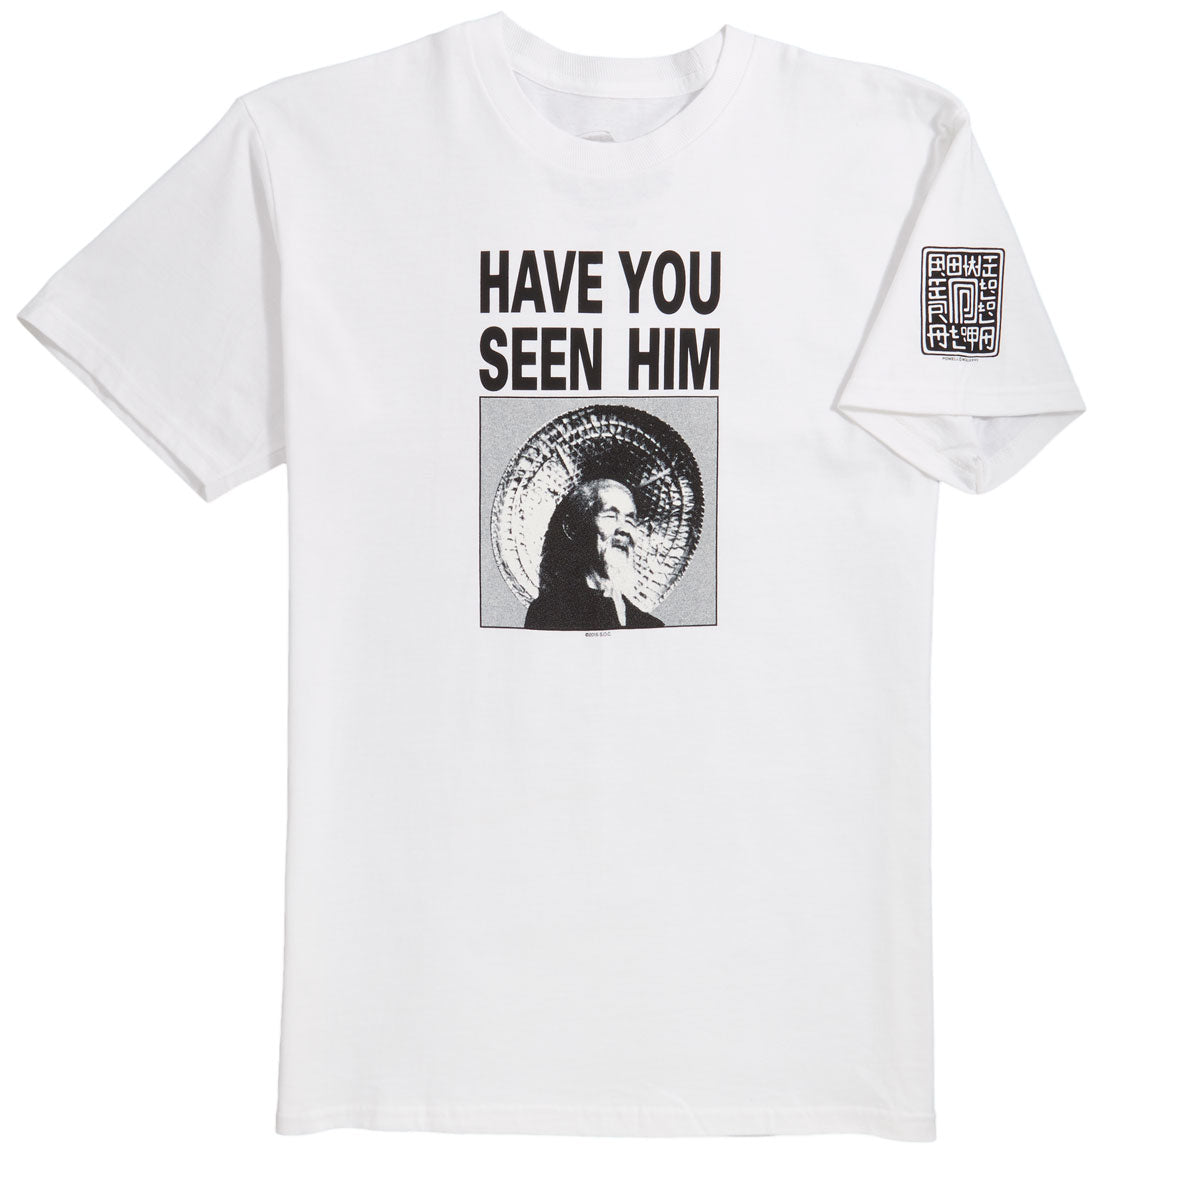 Powell-Peralta Animal Chin Have You Seen Him T-Shirt - White image 2